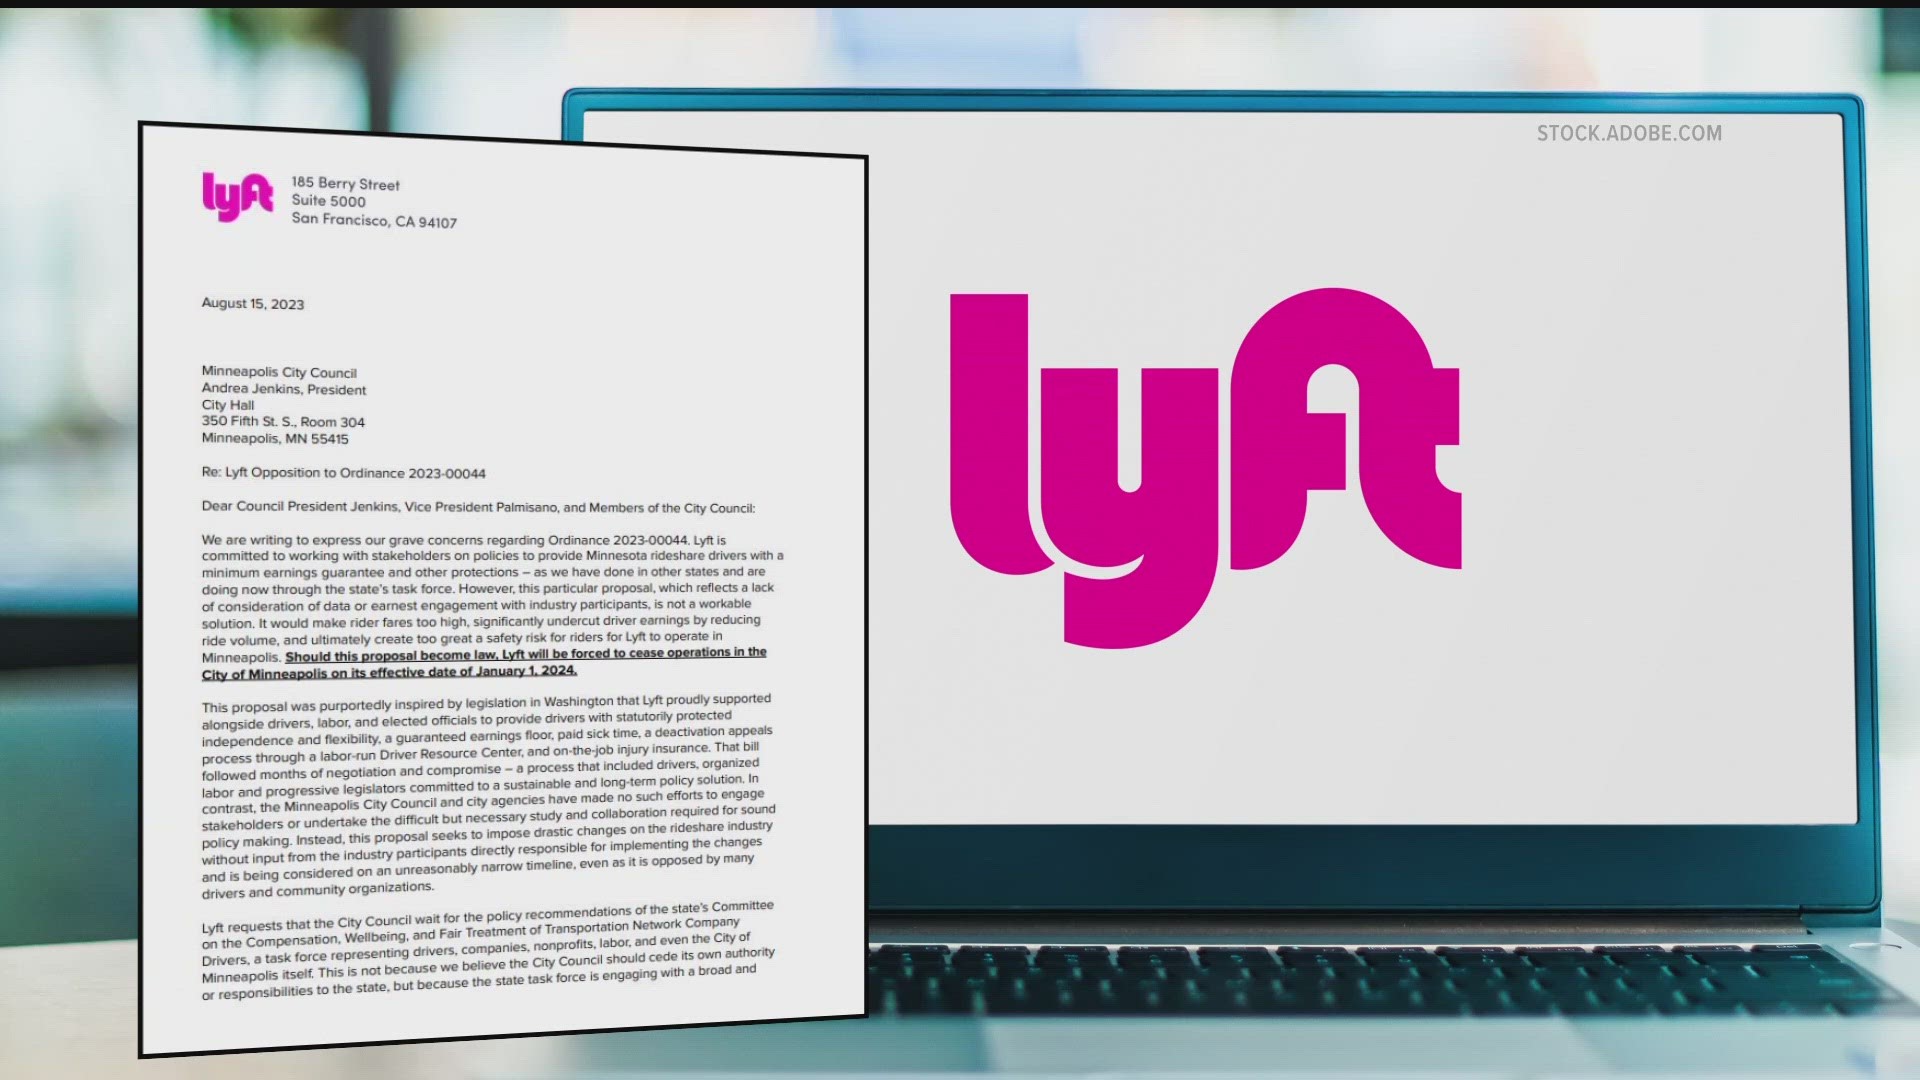 Lyft told riders it would "be forced to stop operating in Minneapolis" on Jan. 1 if the City Council passes a rideshare ordinance Thursday and the mayor signs it.